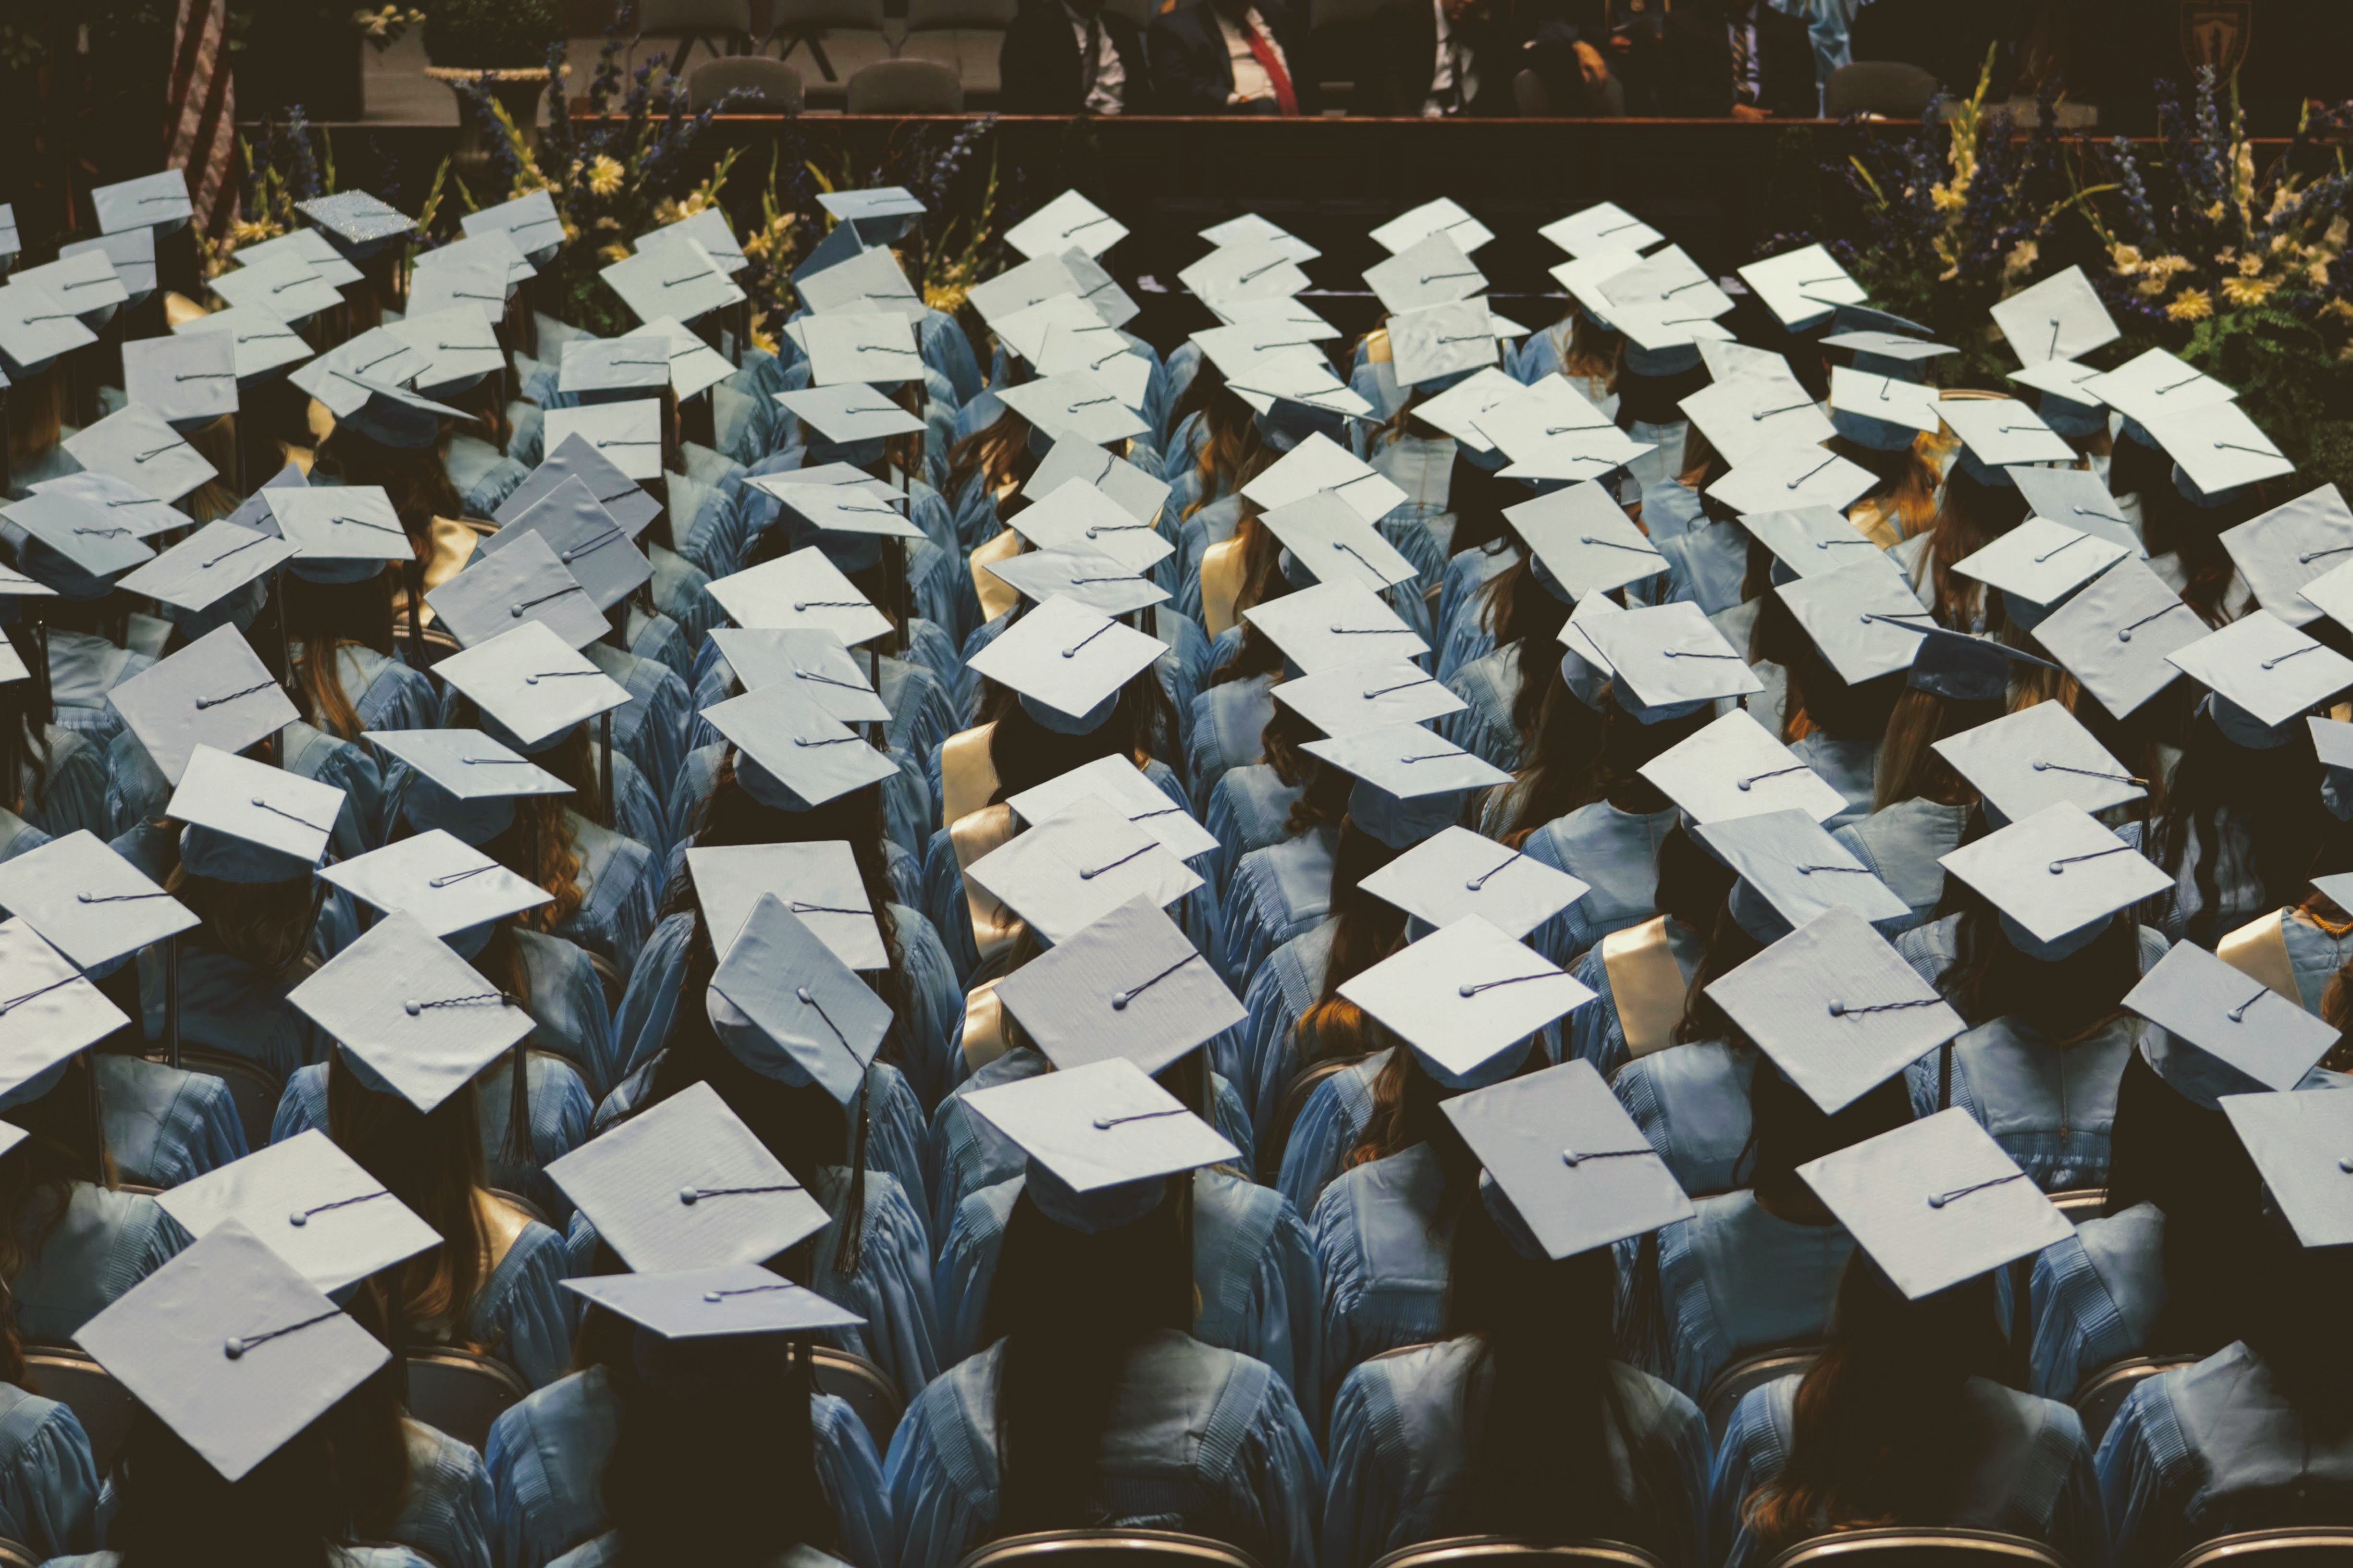 Photograph of university graduates sitting at their commencement ceremony